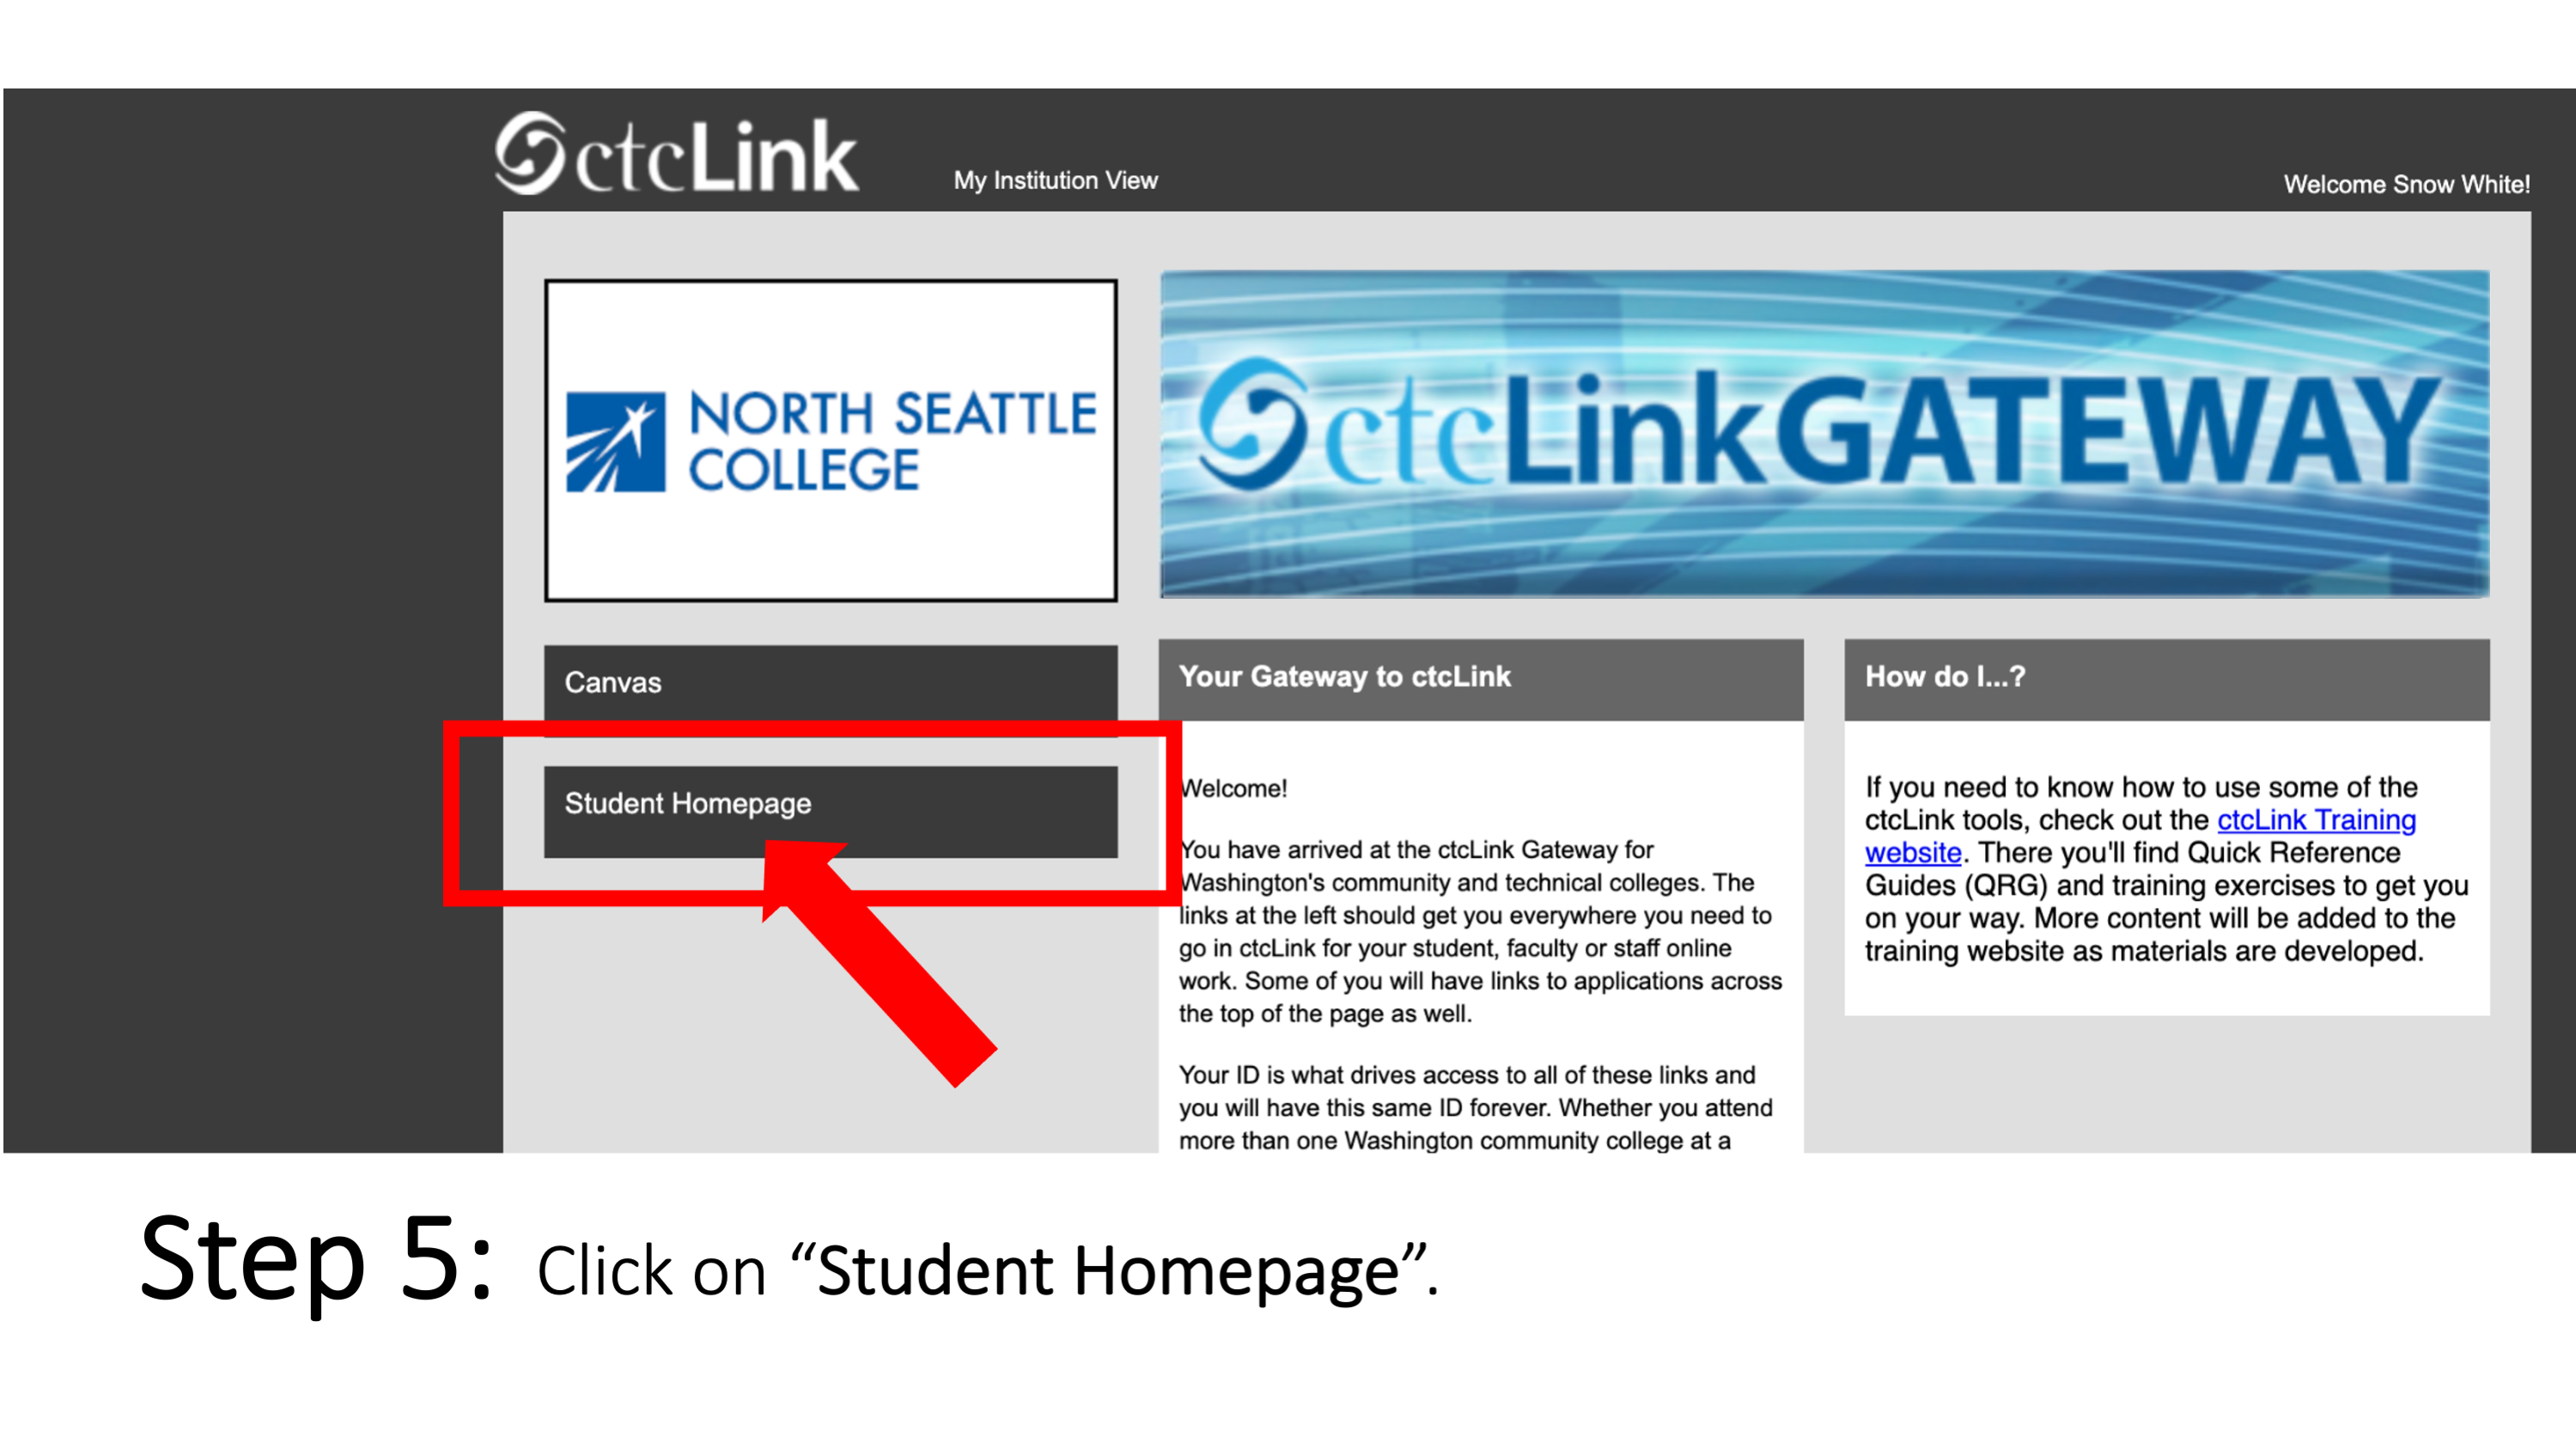 Slide 6 - Step 5: Click on “Student Homepage”.   